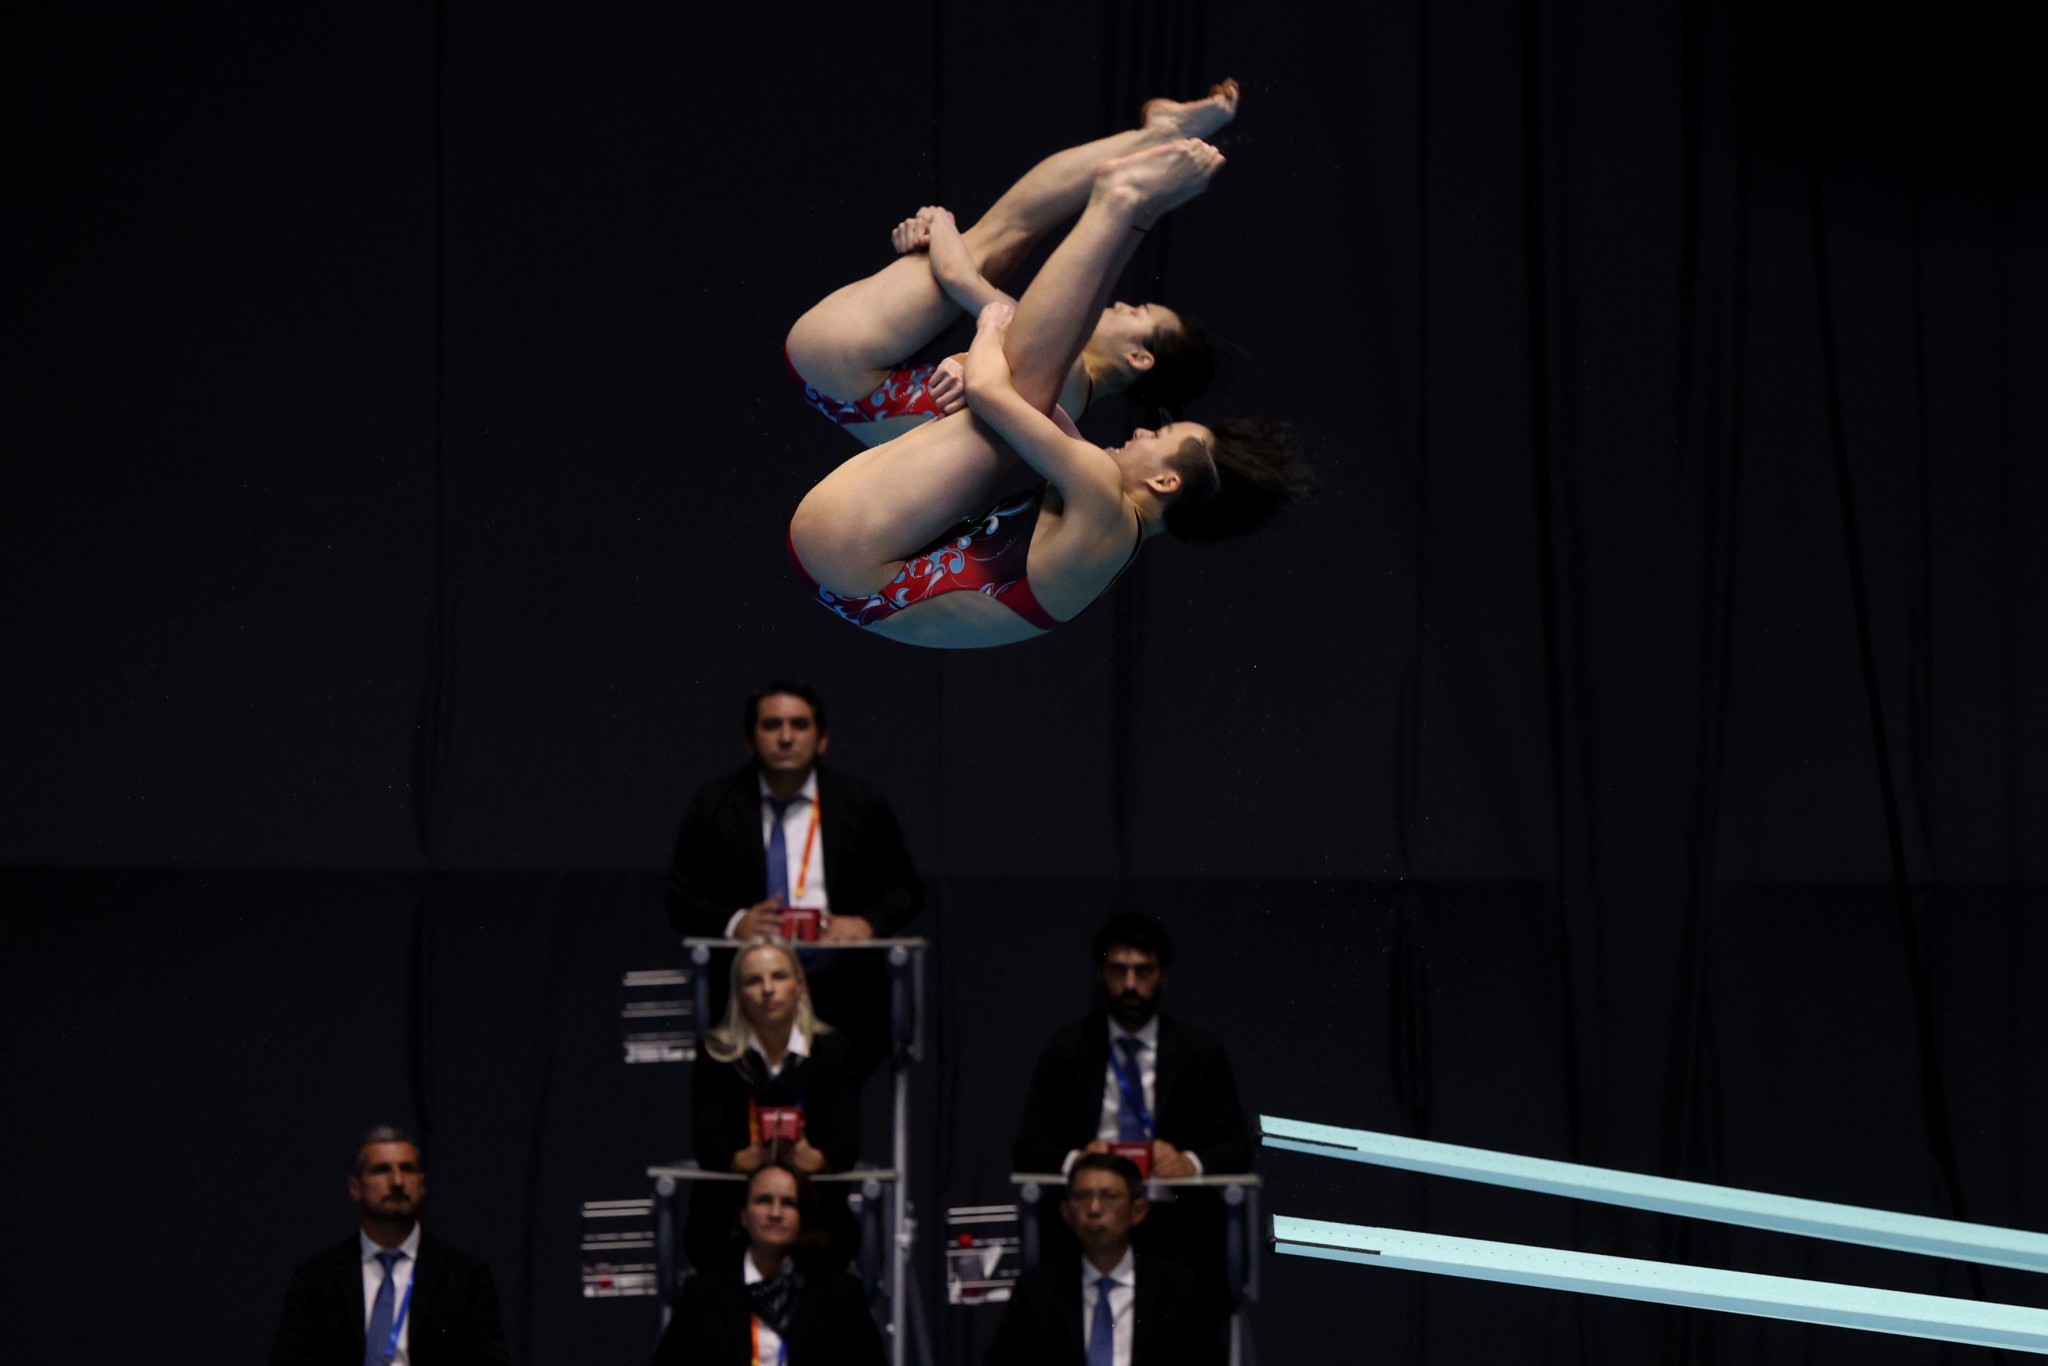 The RAI commentators were suspended for comments made during the synchronised diving at the World Aquatics Championships in Fukuoka©Getty Images